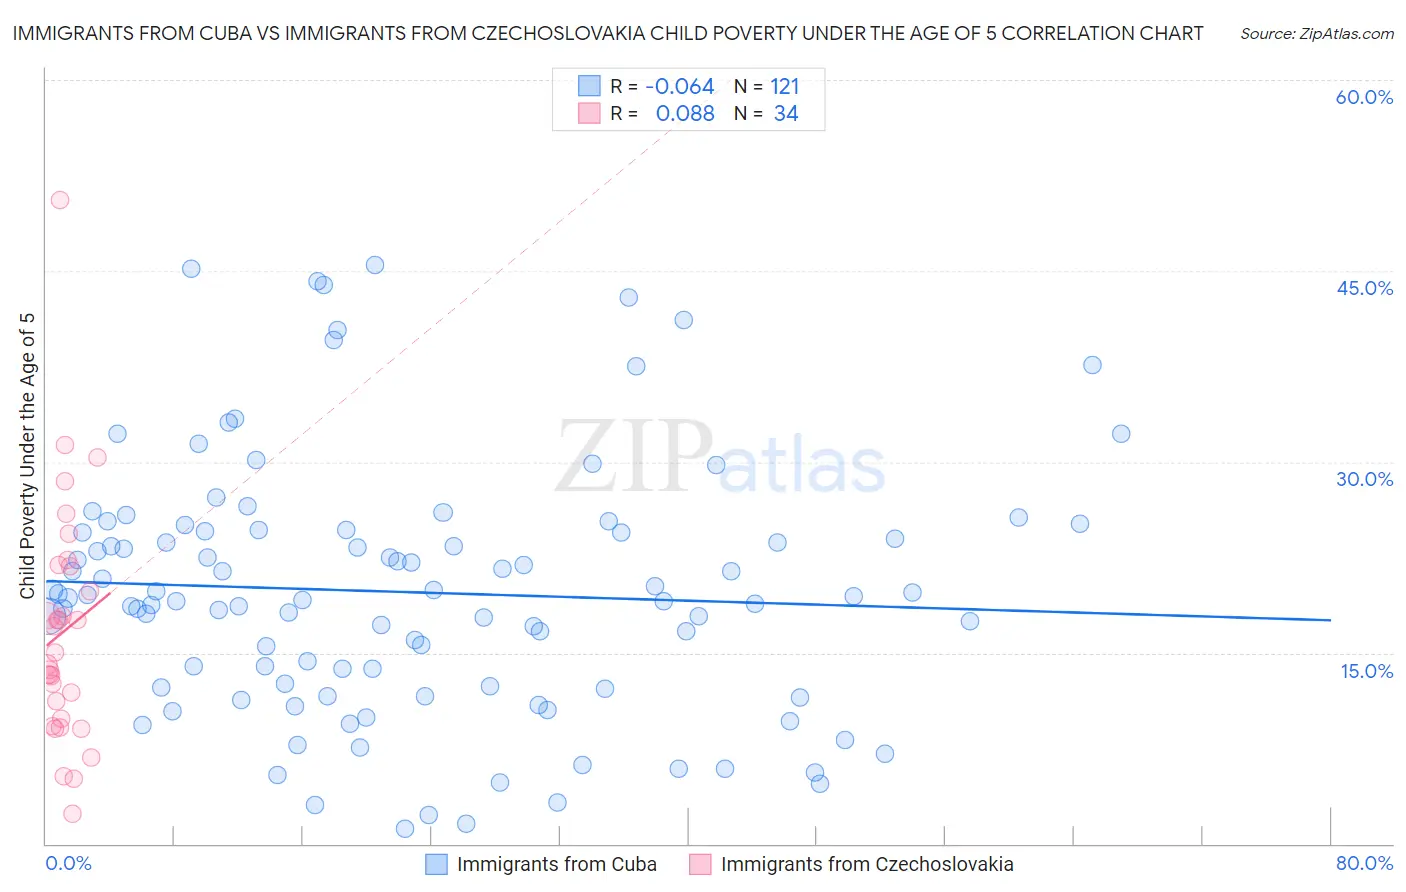 Immigrants from Cuba vs Immigrants from Czechoslovakia Child Poverty Under the Age of 5